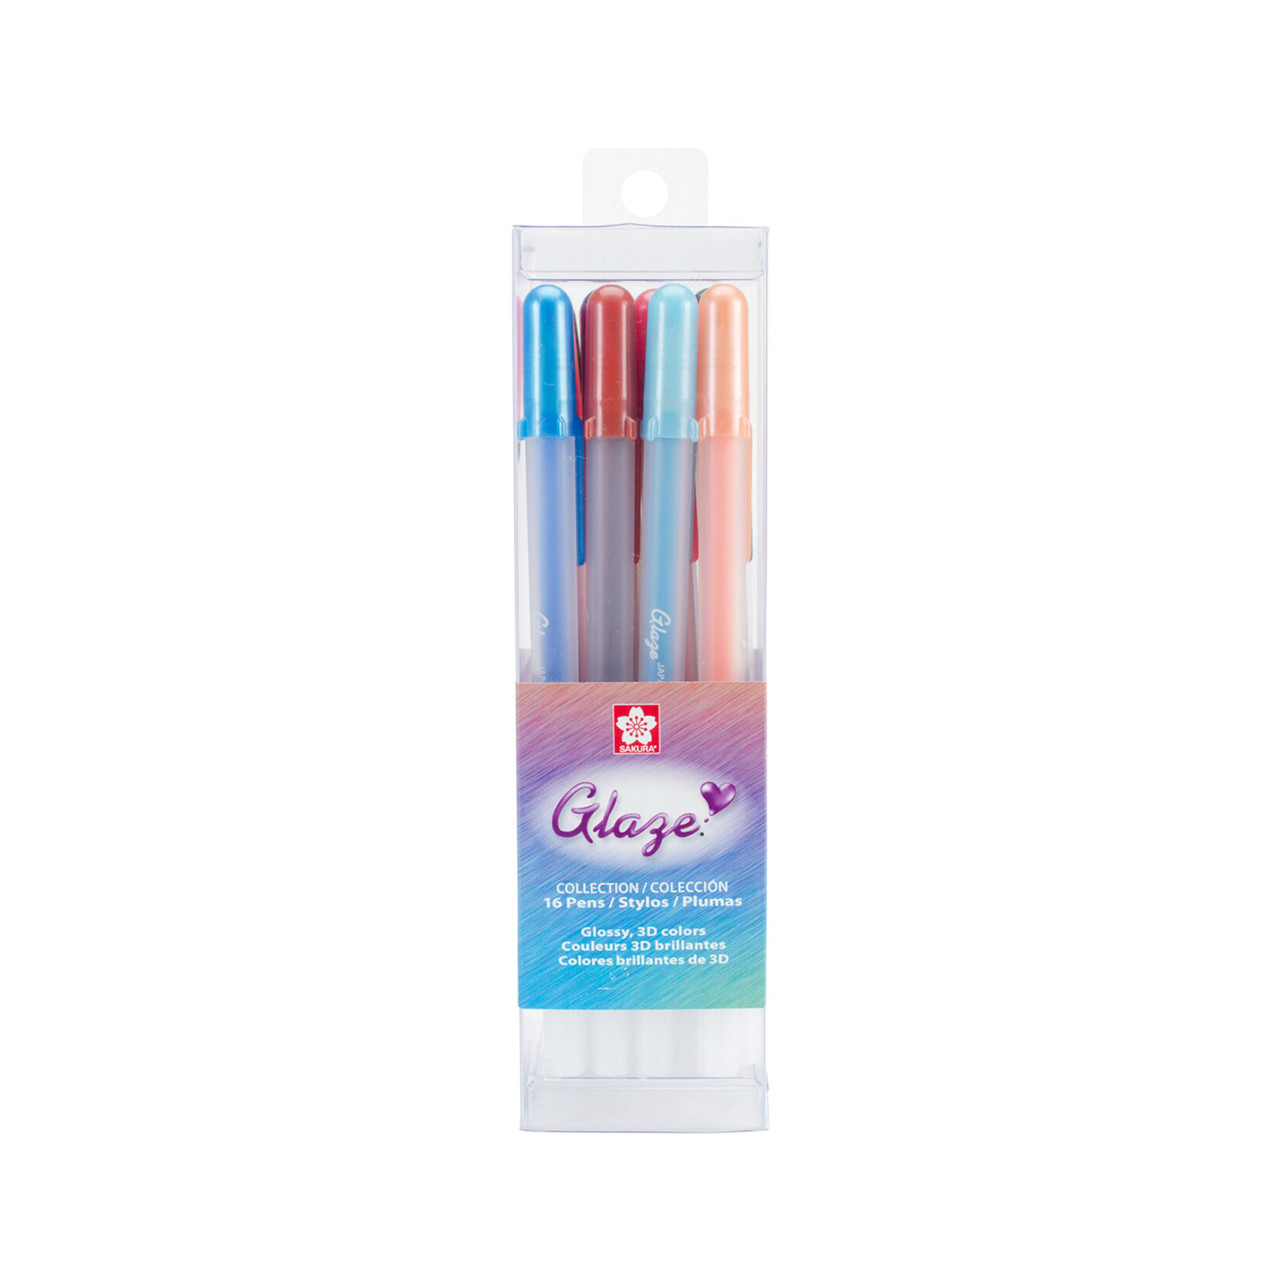 SAKURA Gelly Roll Glaze Pens Bright Assorted Colors 10-Pack